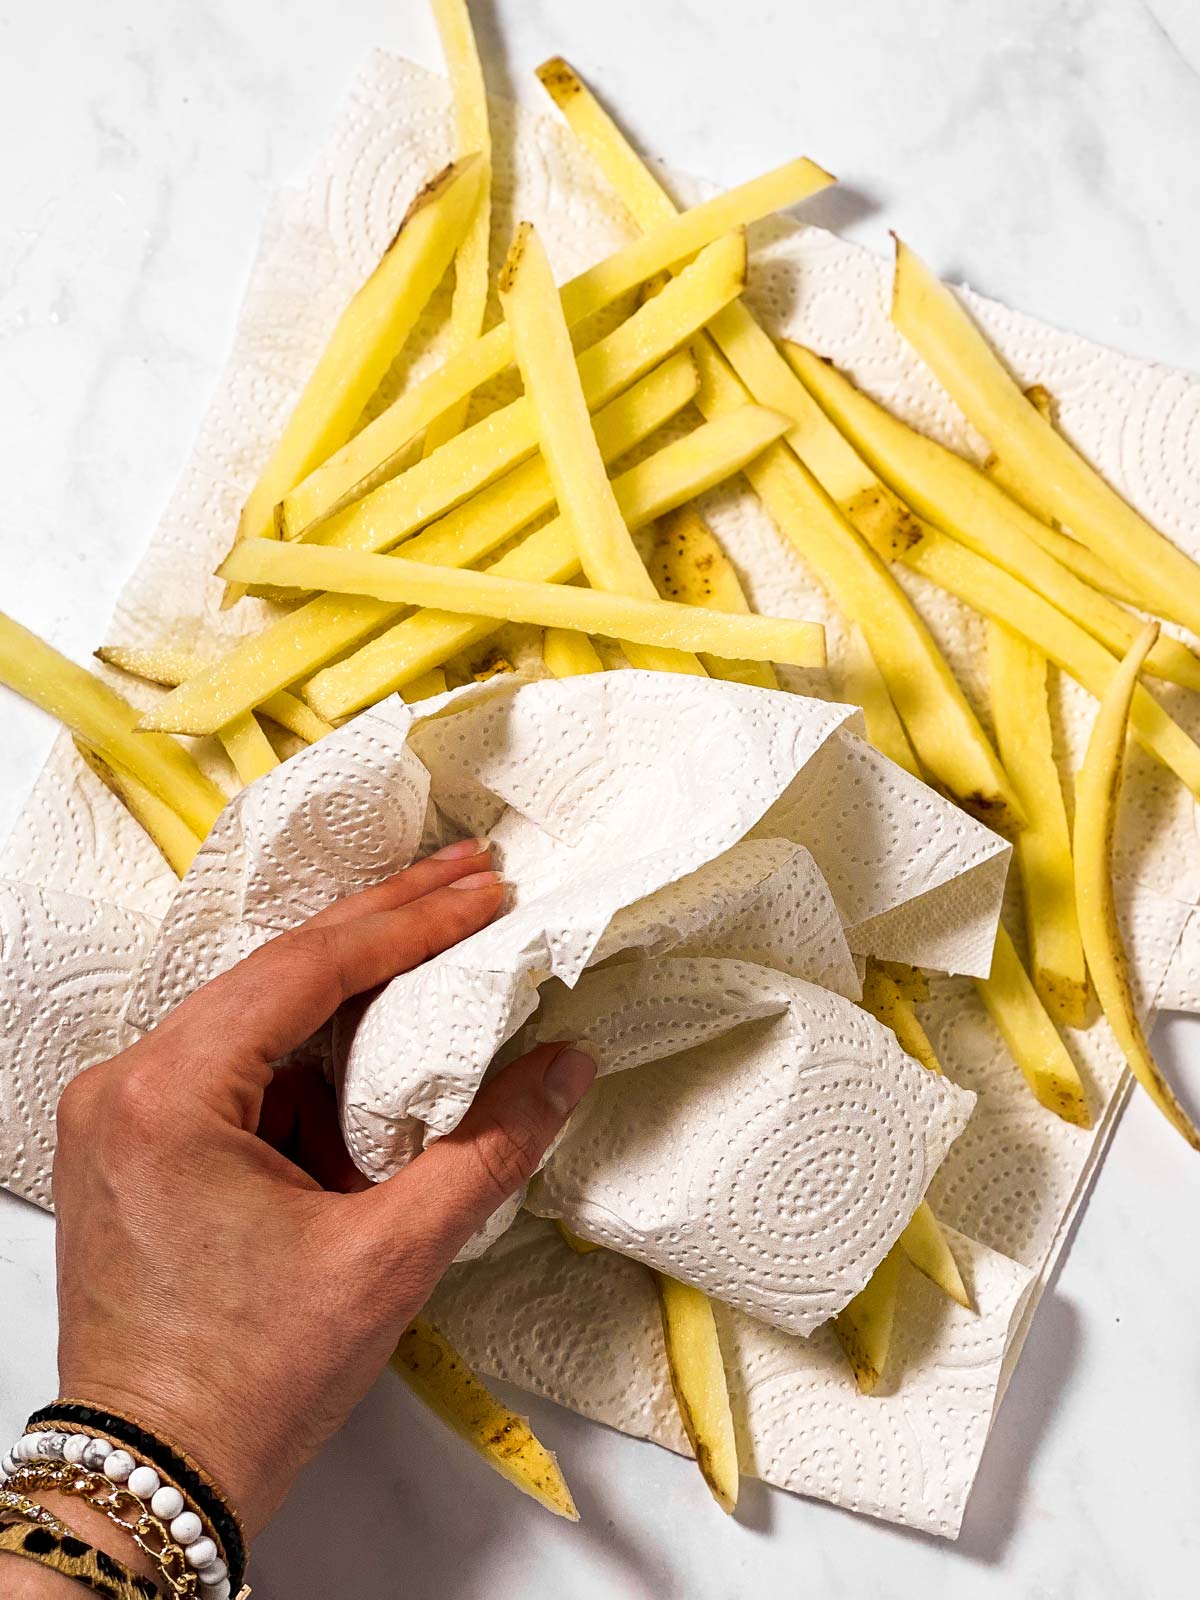 female hand using paper towels to dry uncooked french fries